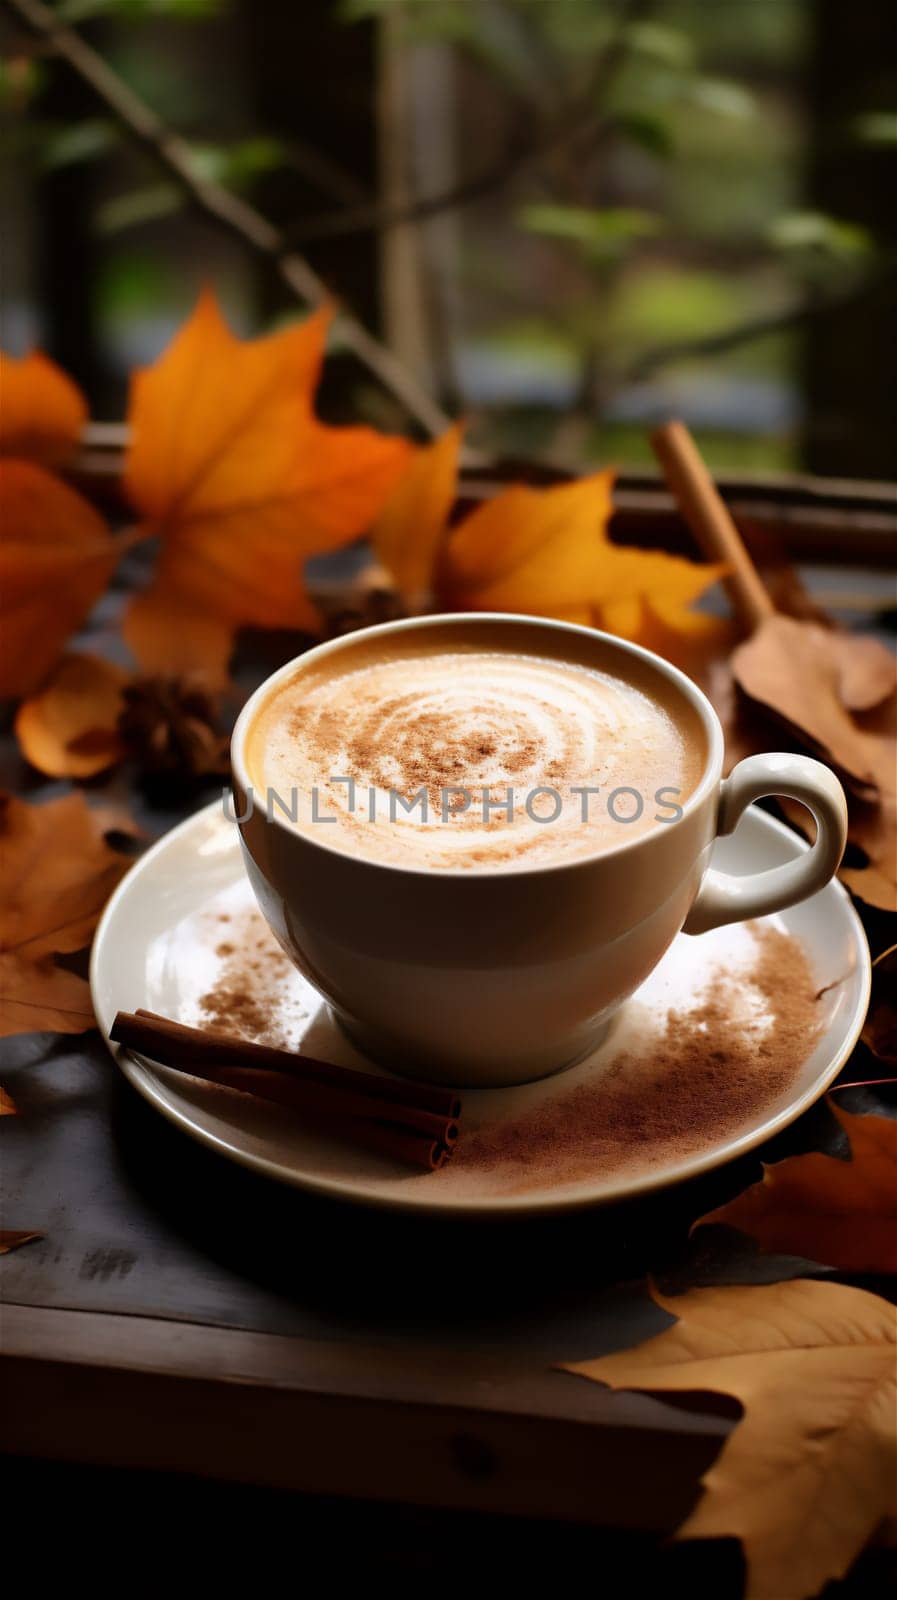 Stories template with cup of tasty spicy cappuccino coffee with cinnamon and autumn leaves on wooden background. Fall and winter warm drinks concept